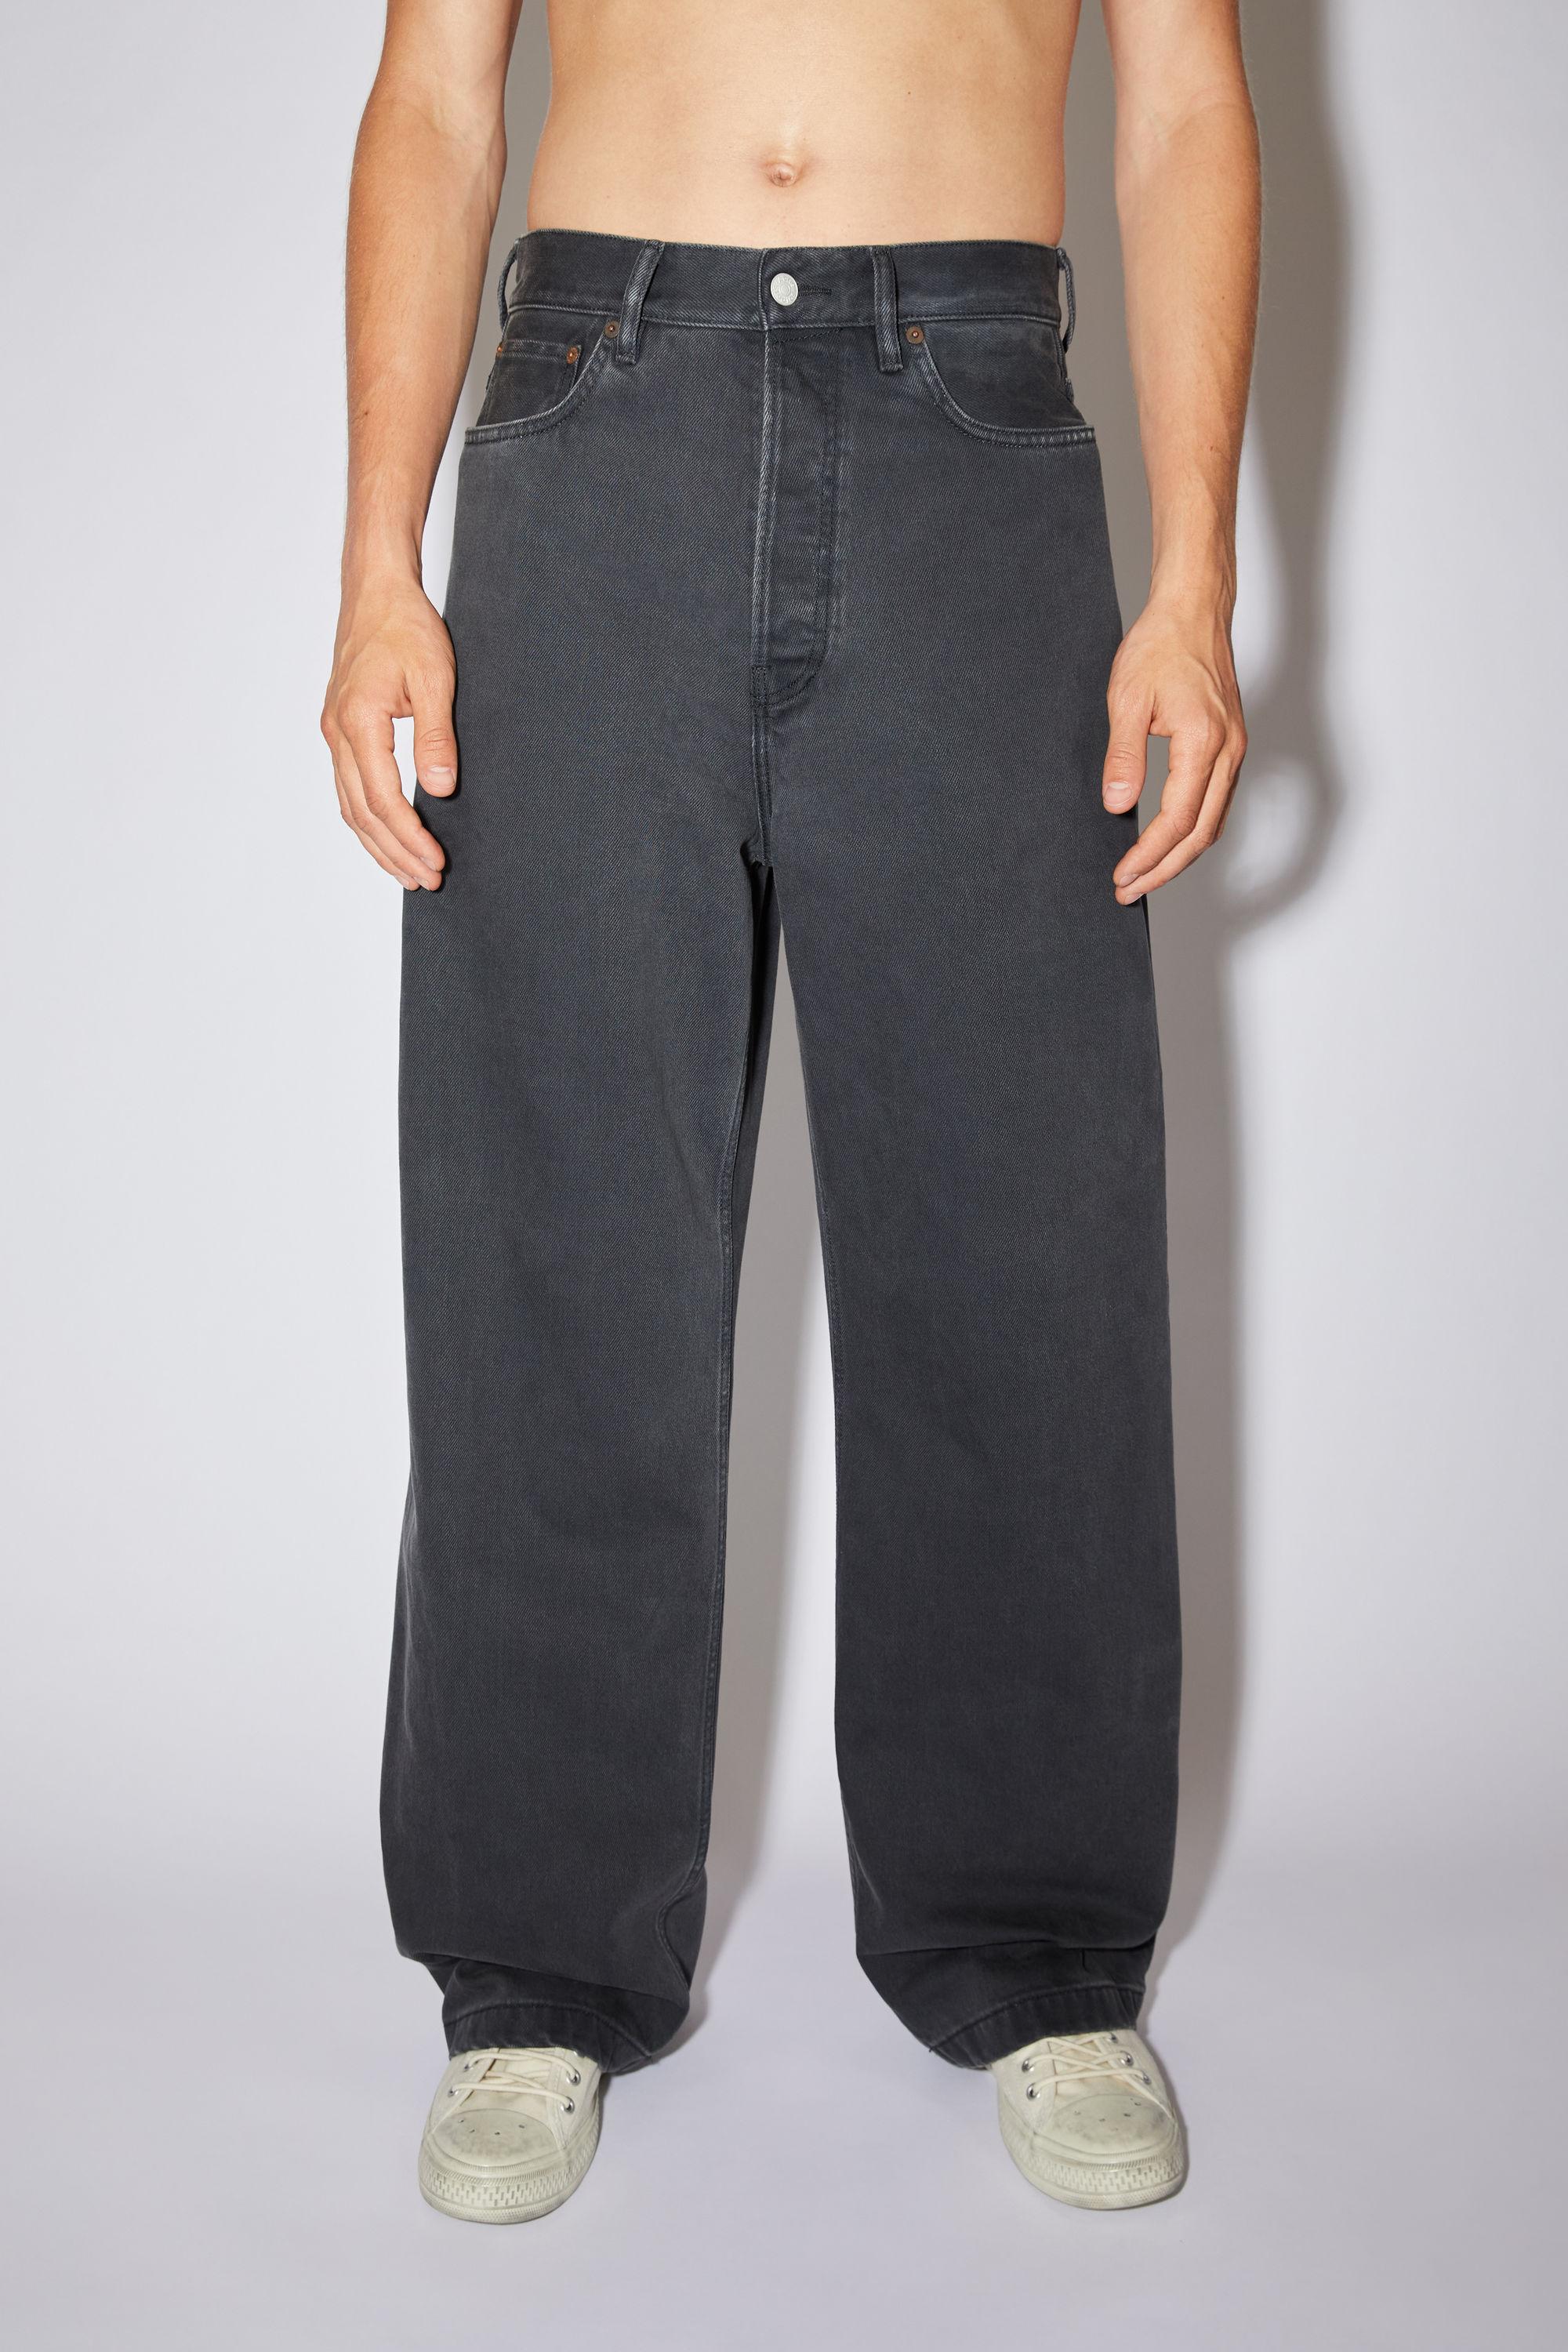 Acne Studios 1989 Faded Black Loose Fit Jeans in Gray | Lyst